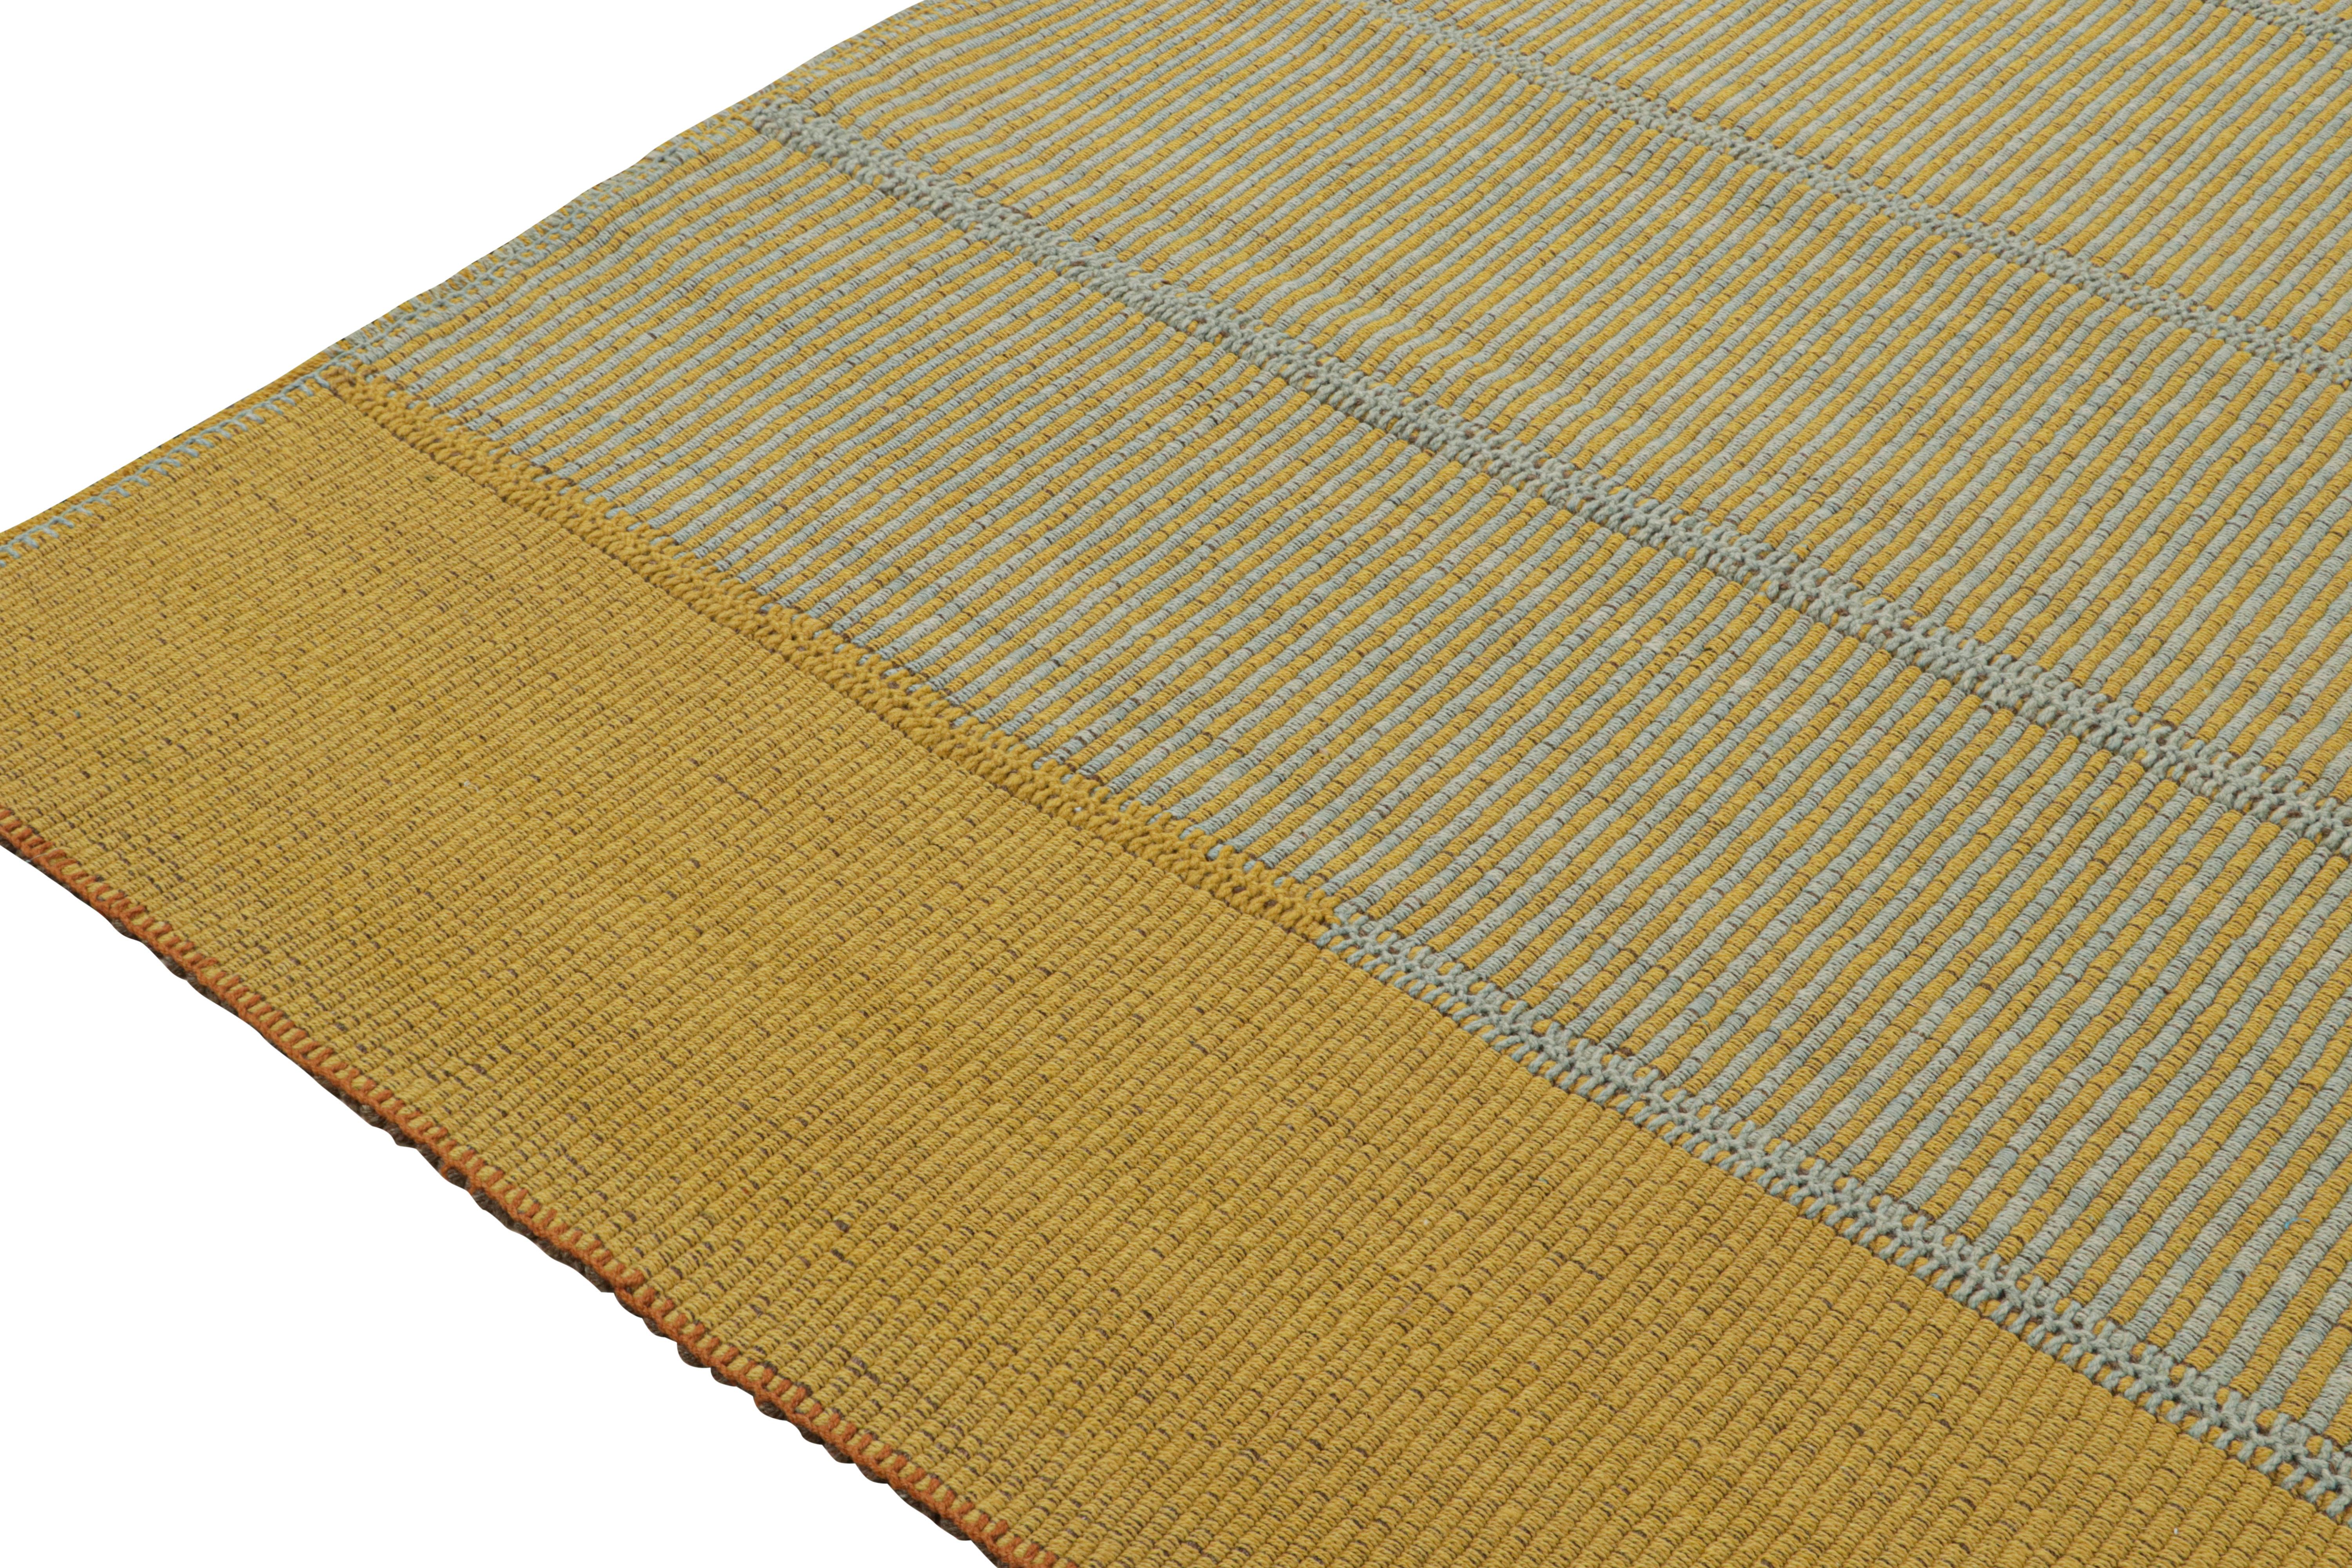 Rug & Kilim’s Contemporary Kilim in Gold and Light Blue Stripes In New Condition For Sale In Long Island City, NY